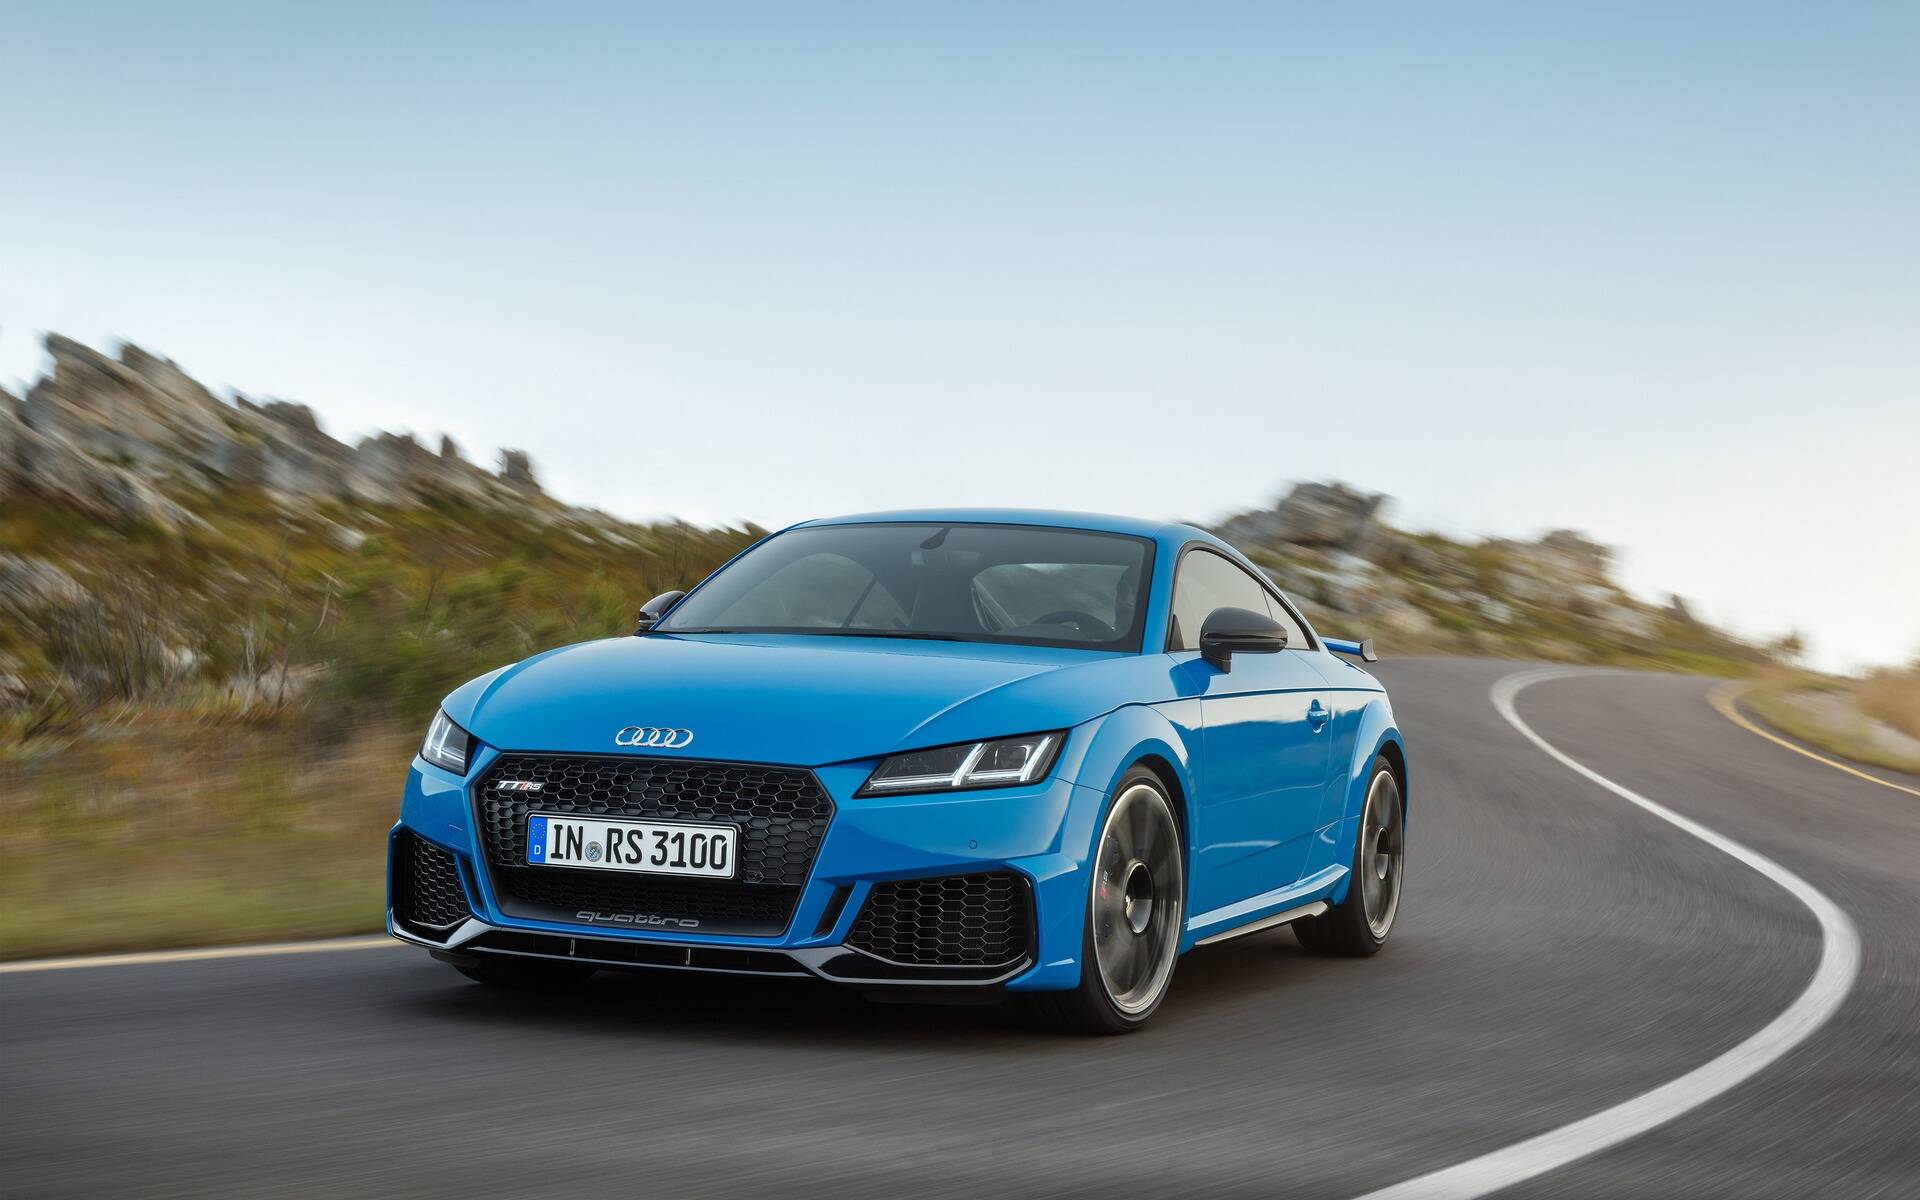 2021 Audi TT - News, reviews, picture galleries and videos - The Car Guide